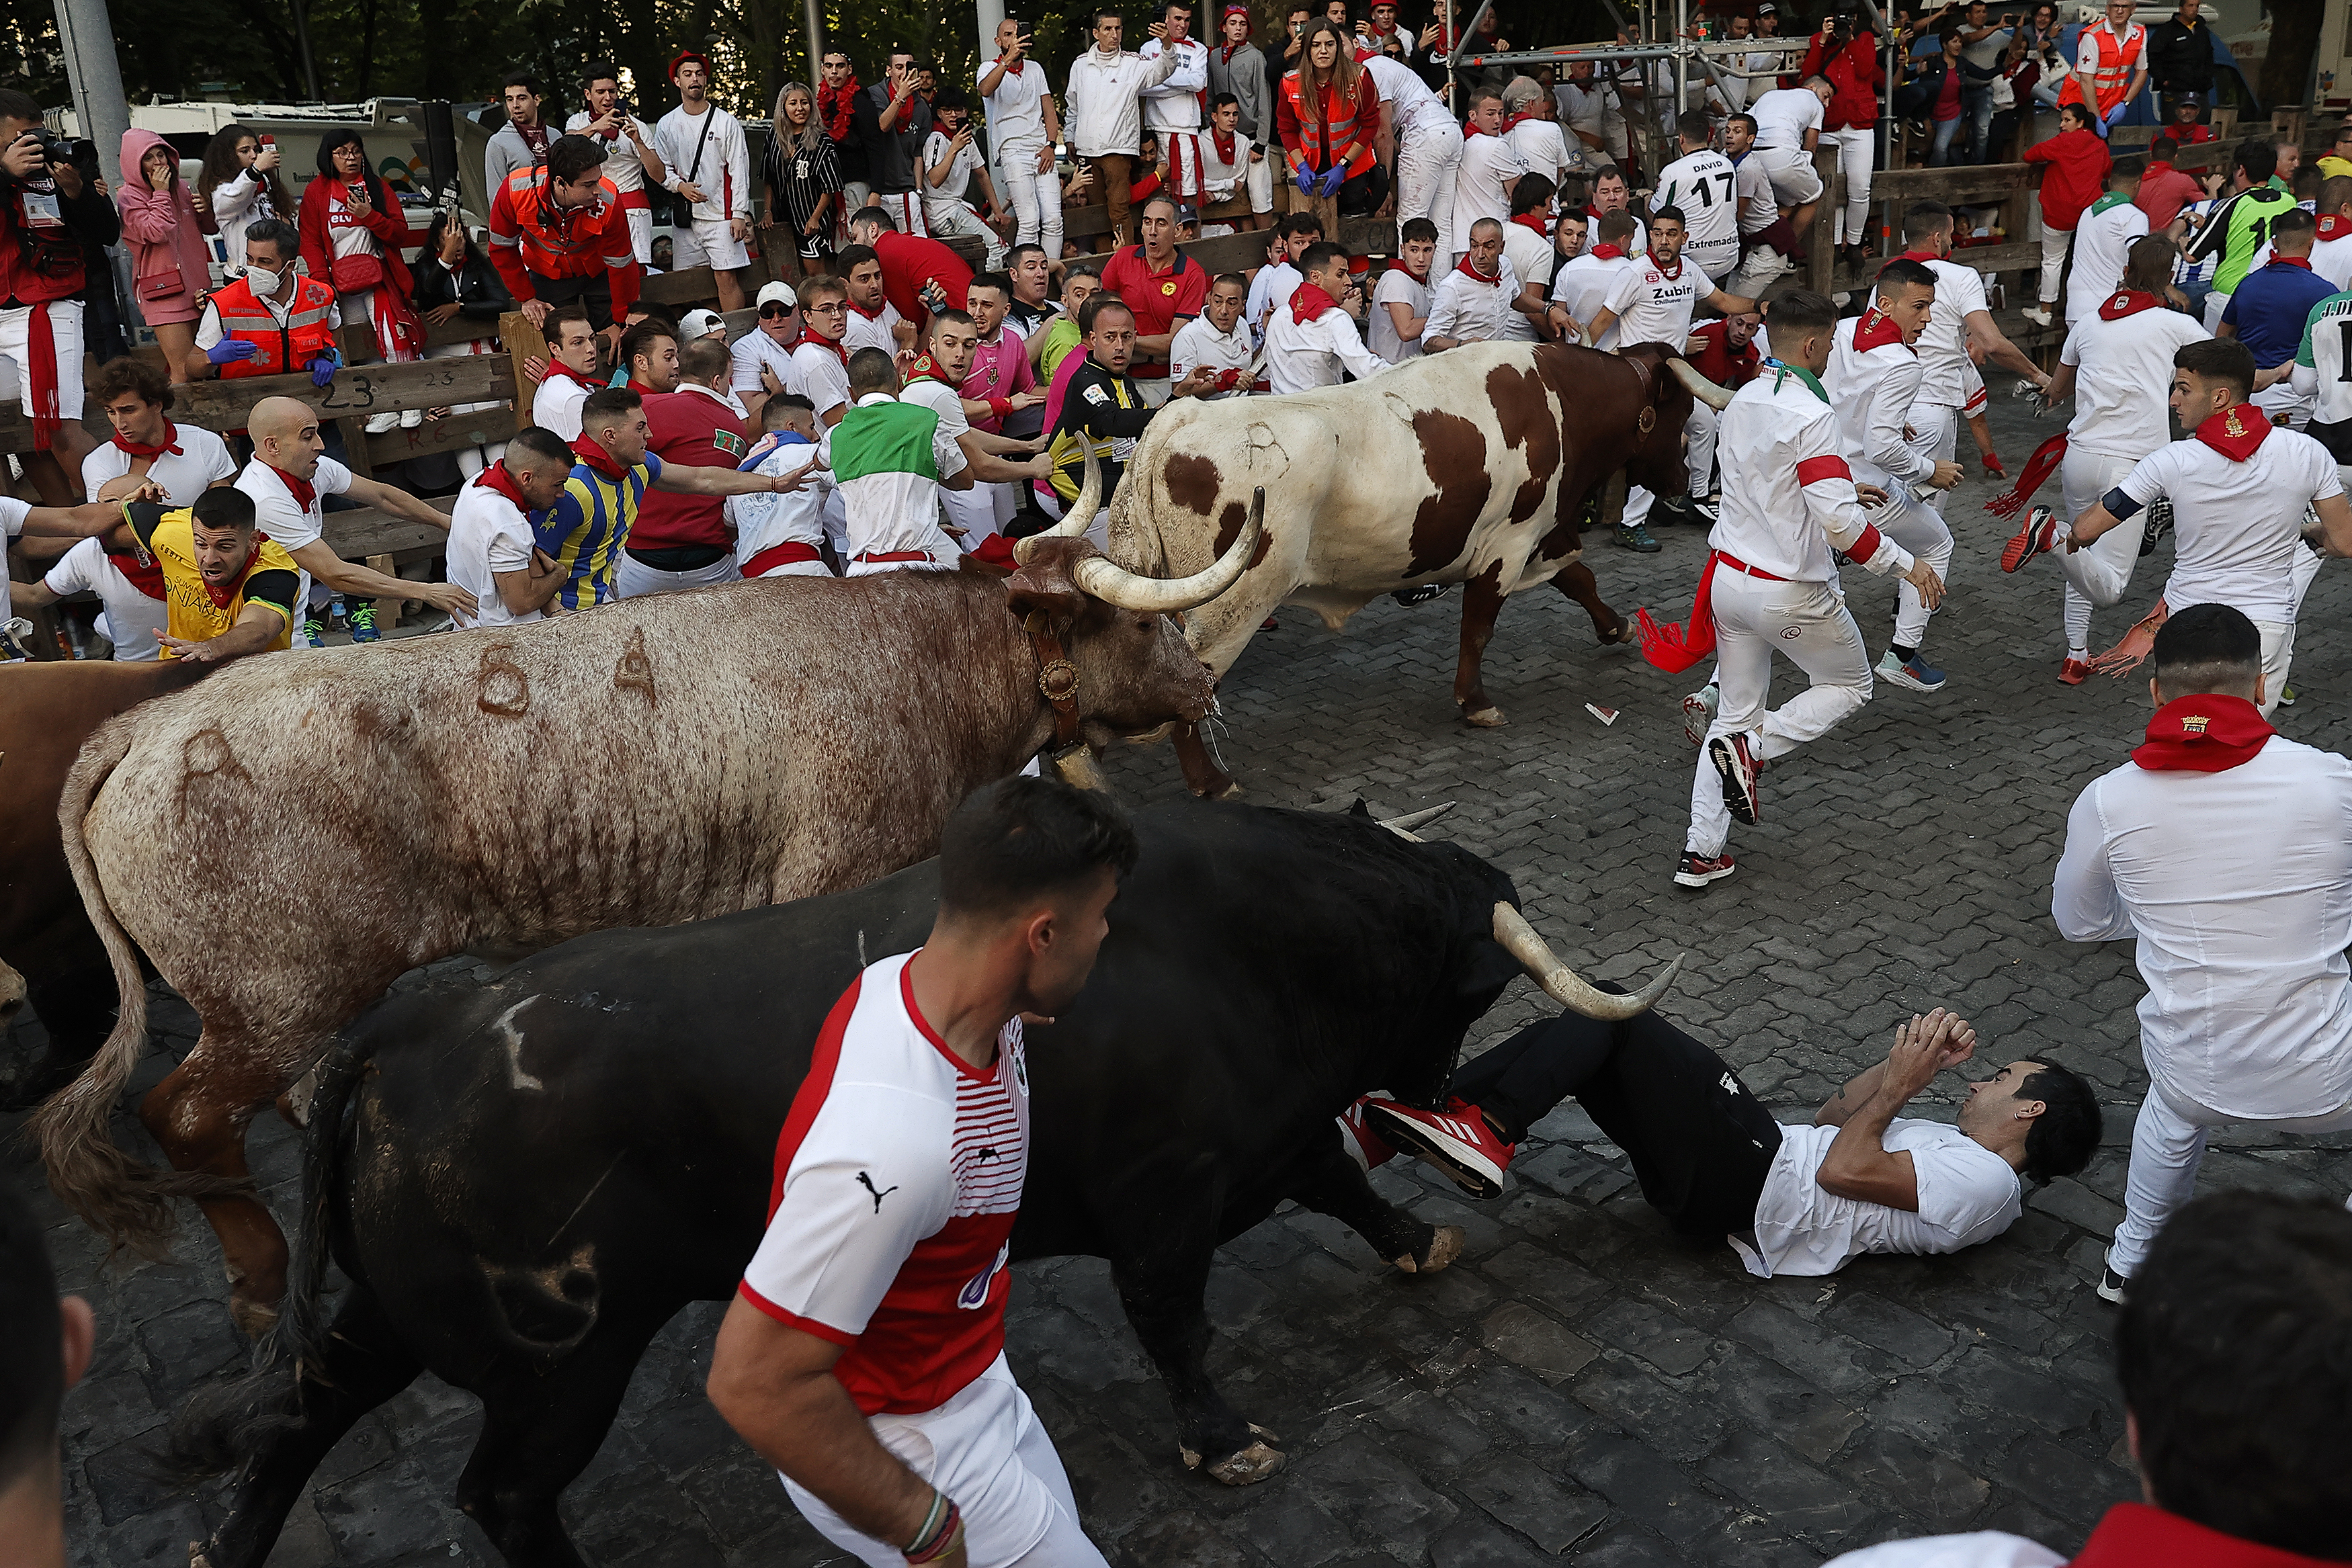 Three dead in 24 hours from goring incidents at Spanish bull run festivals  - National